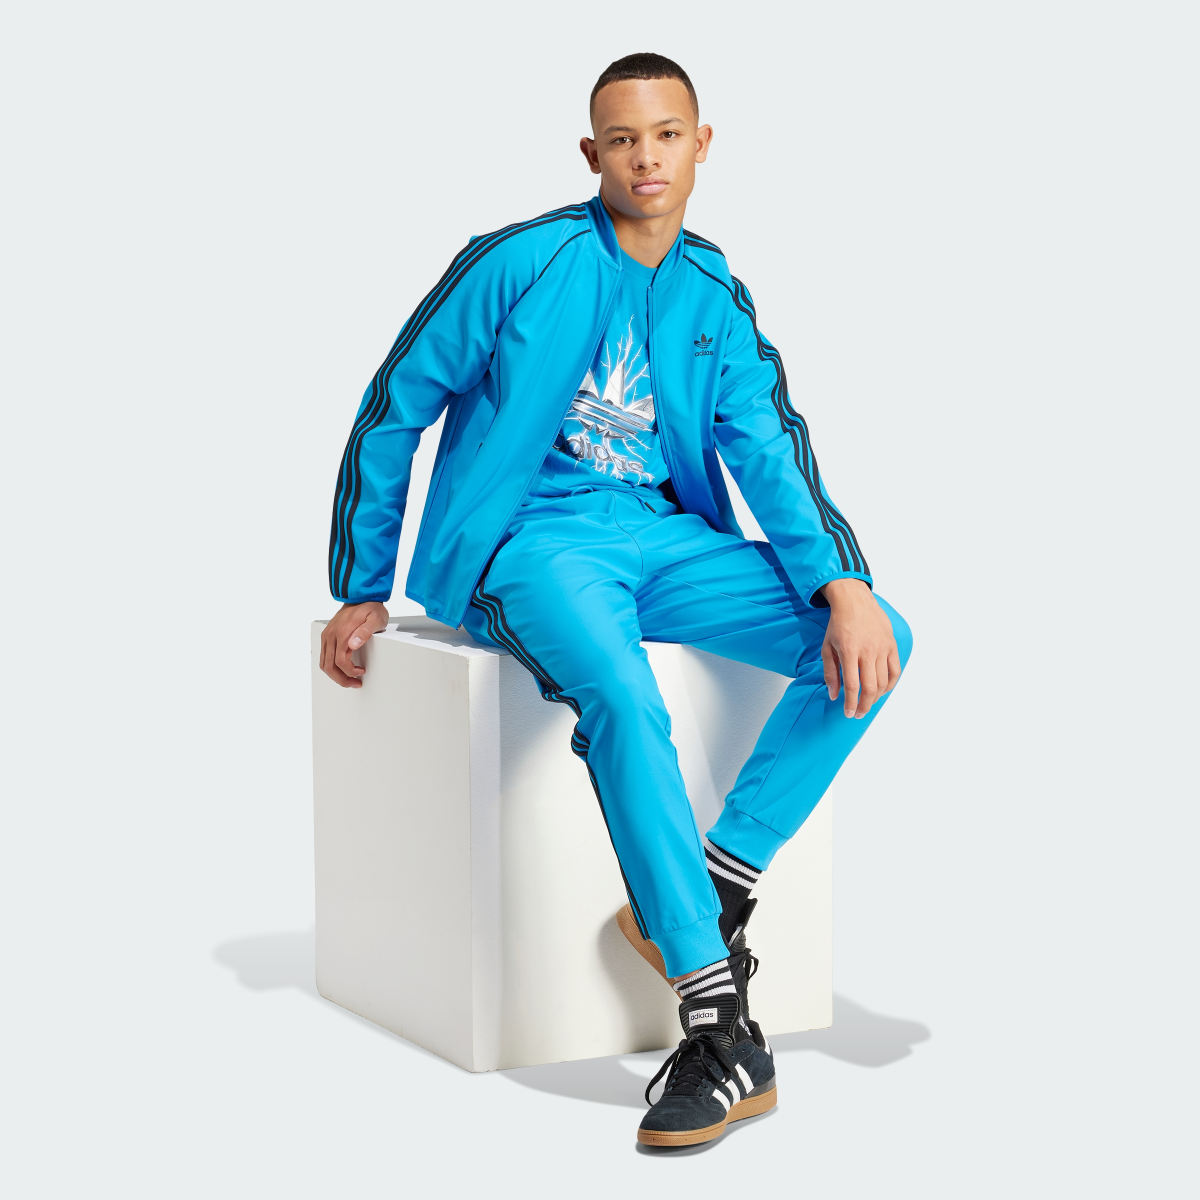 Adidas SST Bonded Track Top. 4